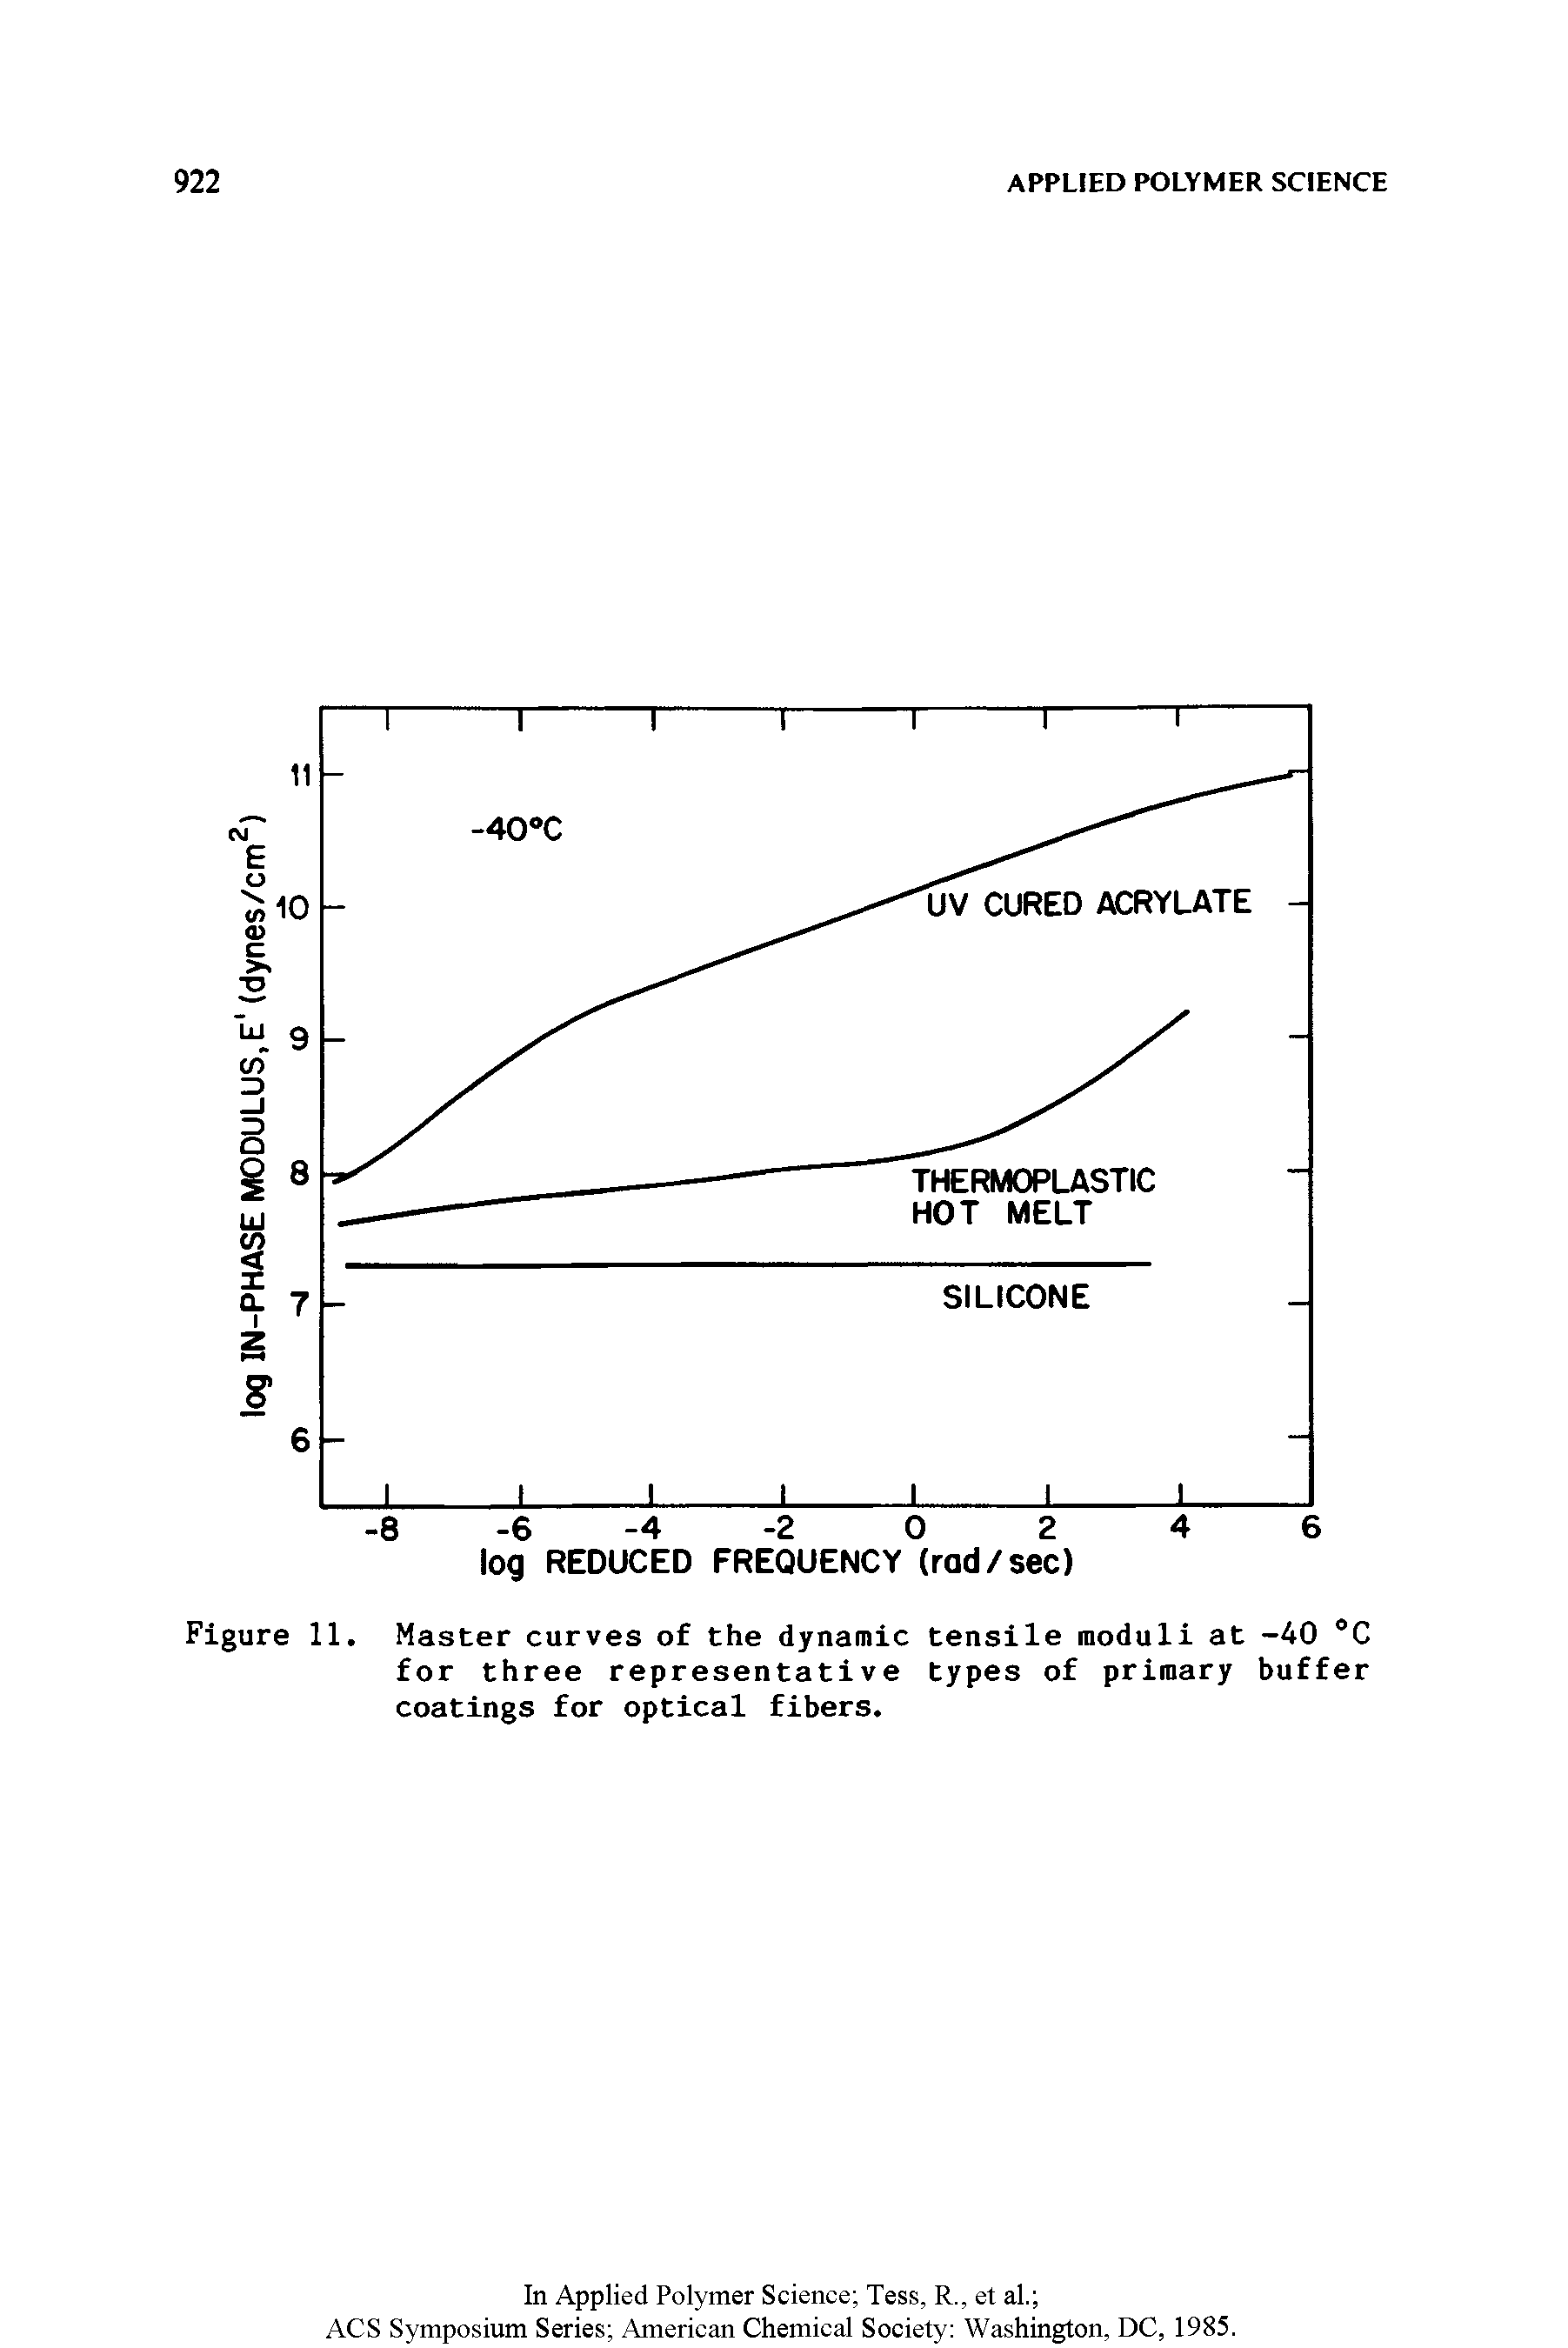 Figure 11. Master curves of the dynamic tensile moduli at -40 C for three representative types of primary buffer coatings for optical fibers.